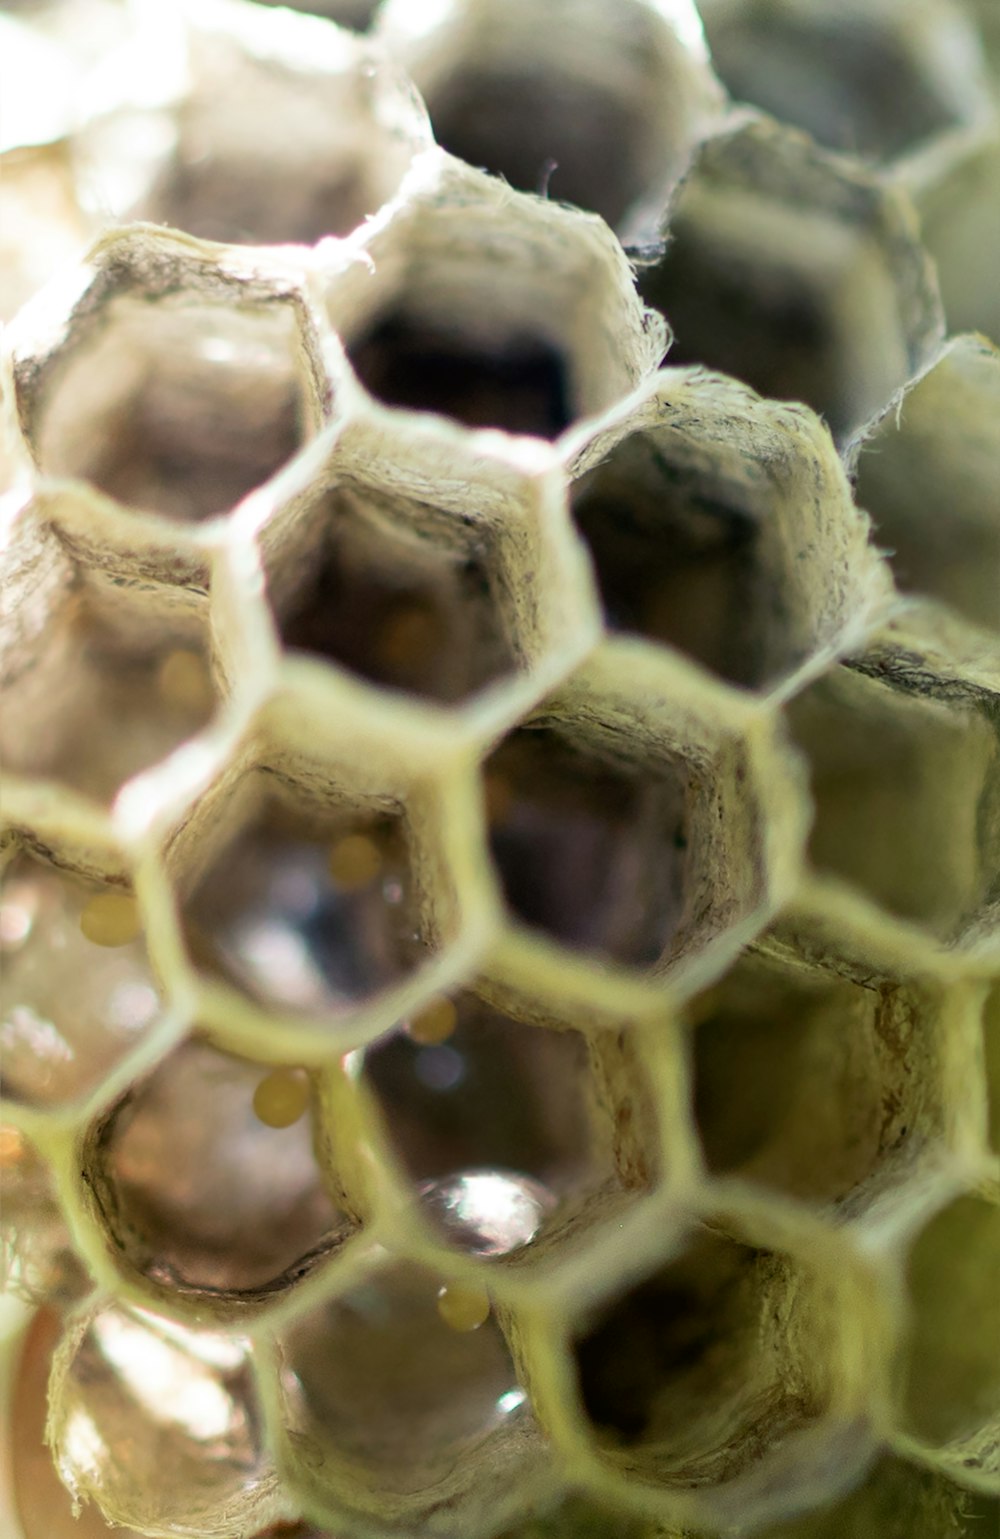 a close up of a honeycomb with water droplets